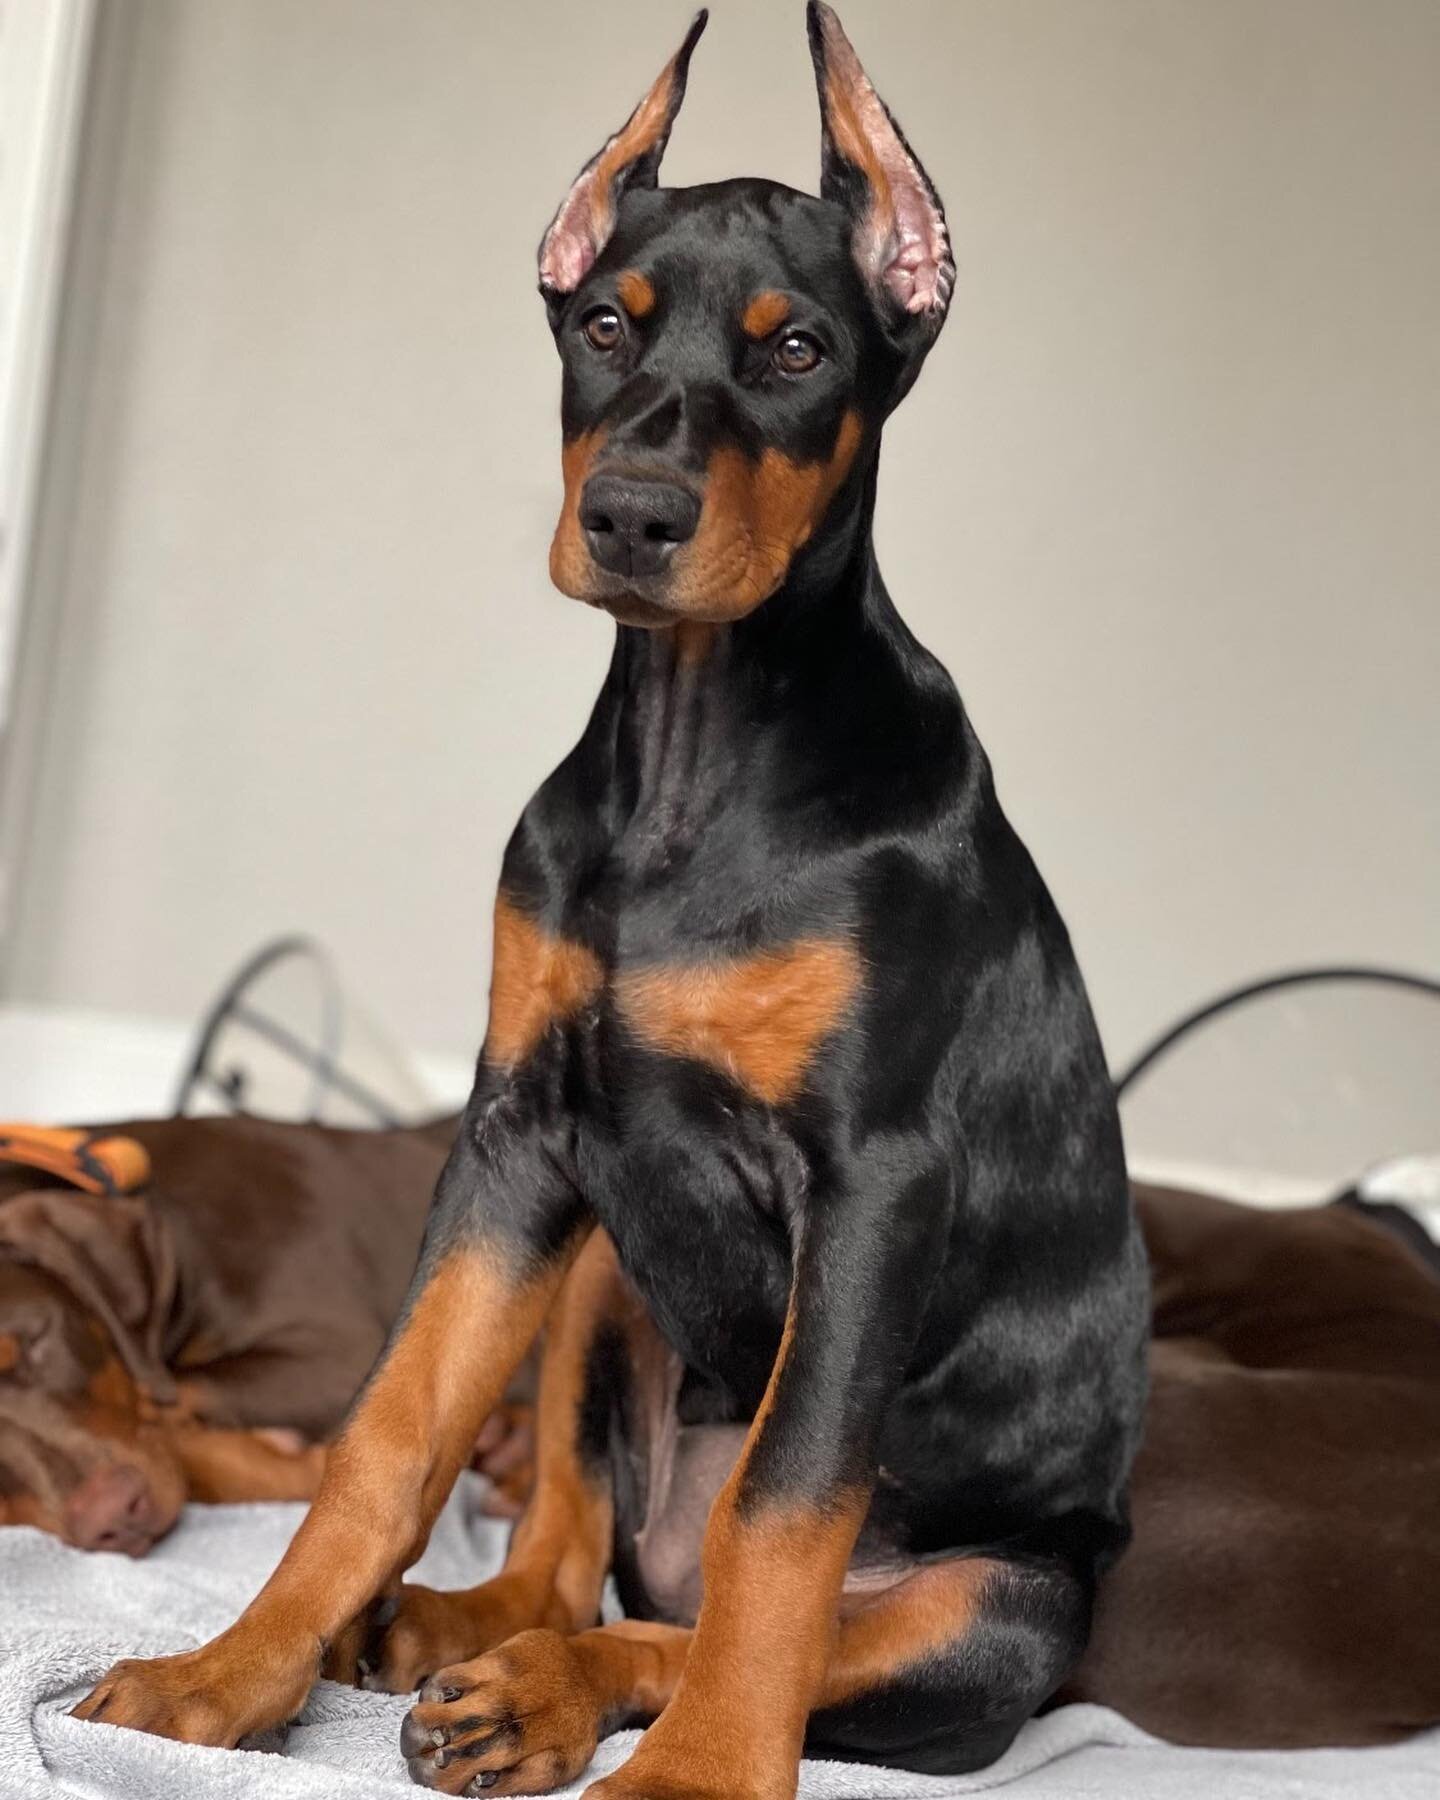 🐾🤎Meet Penny🤎🐾
She is a 1.5 year old Doberman &amp; she just finished her 8 lesson obedience program💪

When Penny came to us, she was extremely shy &amp; struggled greeting new people, she was very anxious on walks, and overall struggled with so